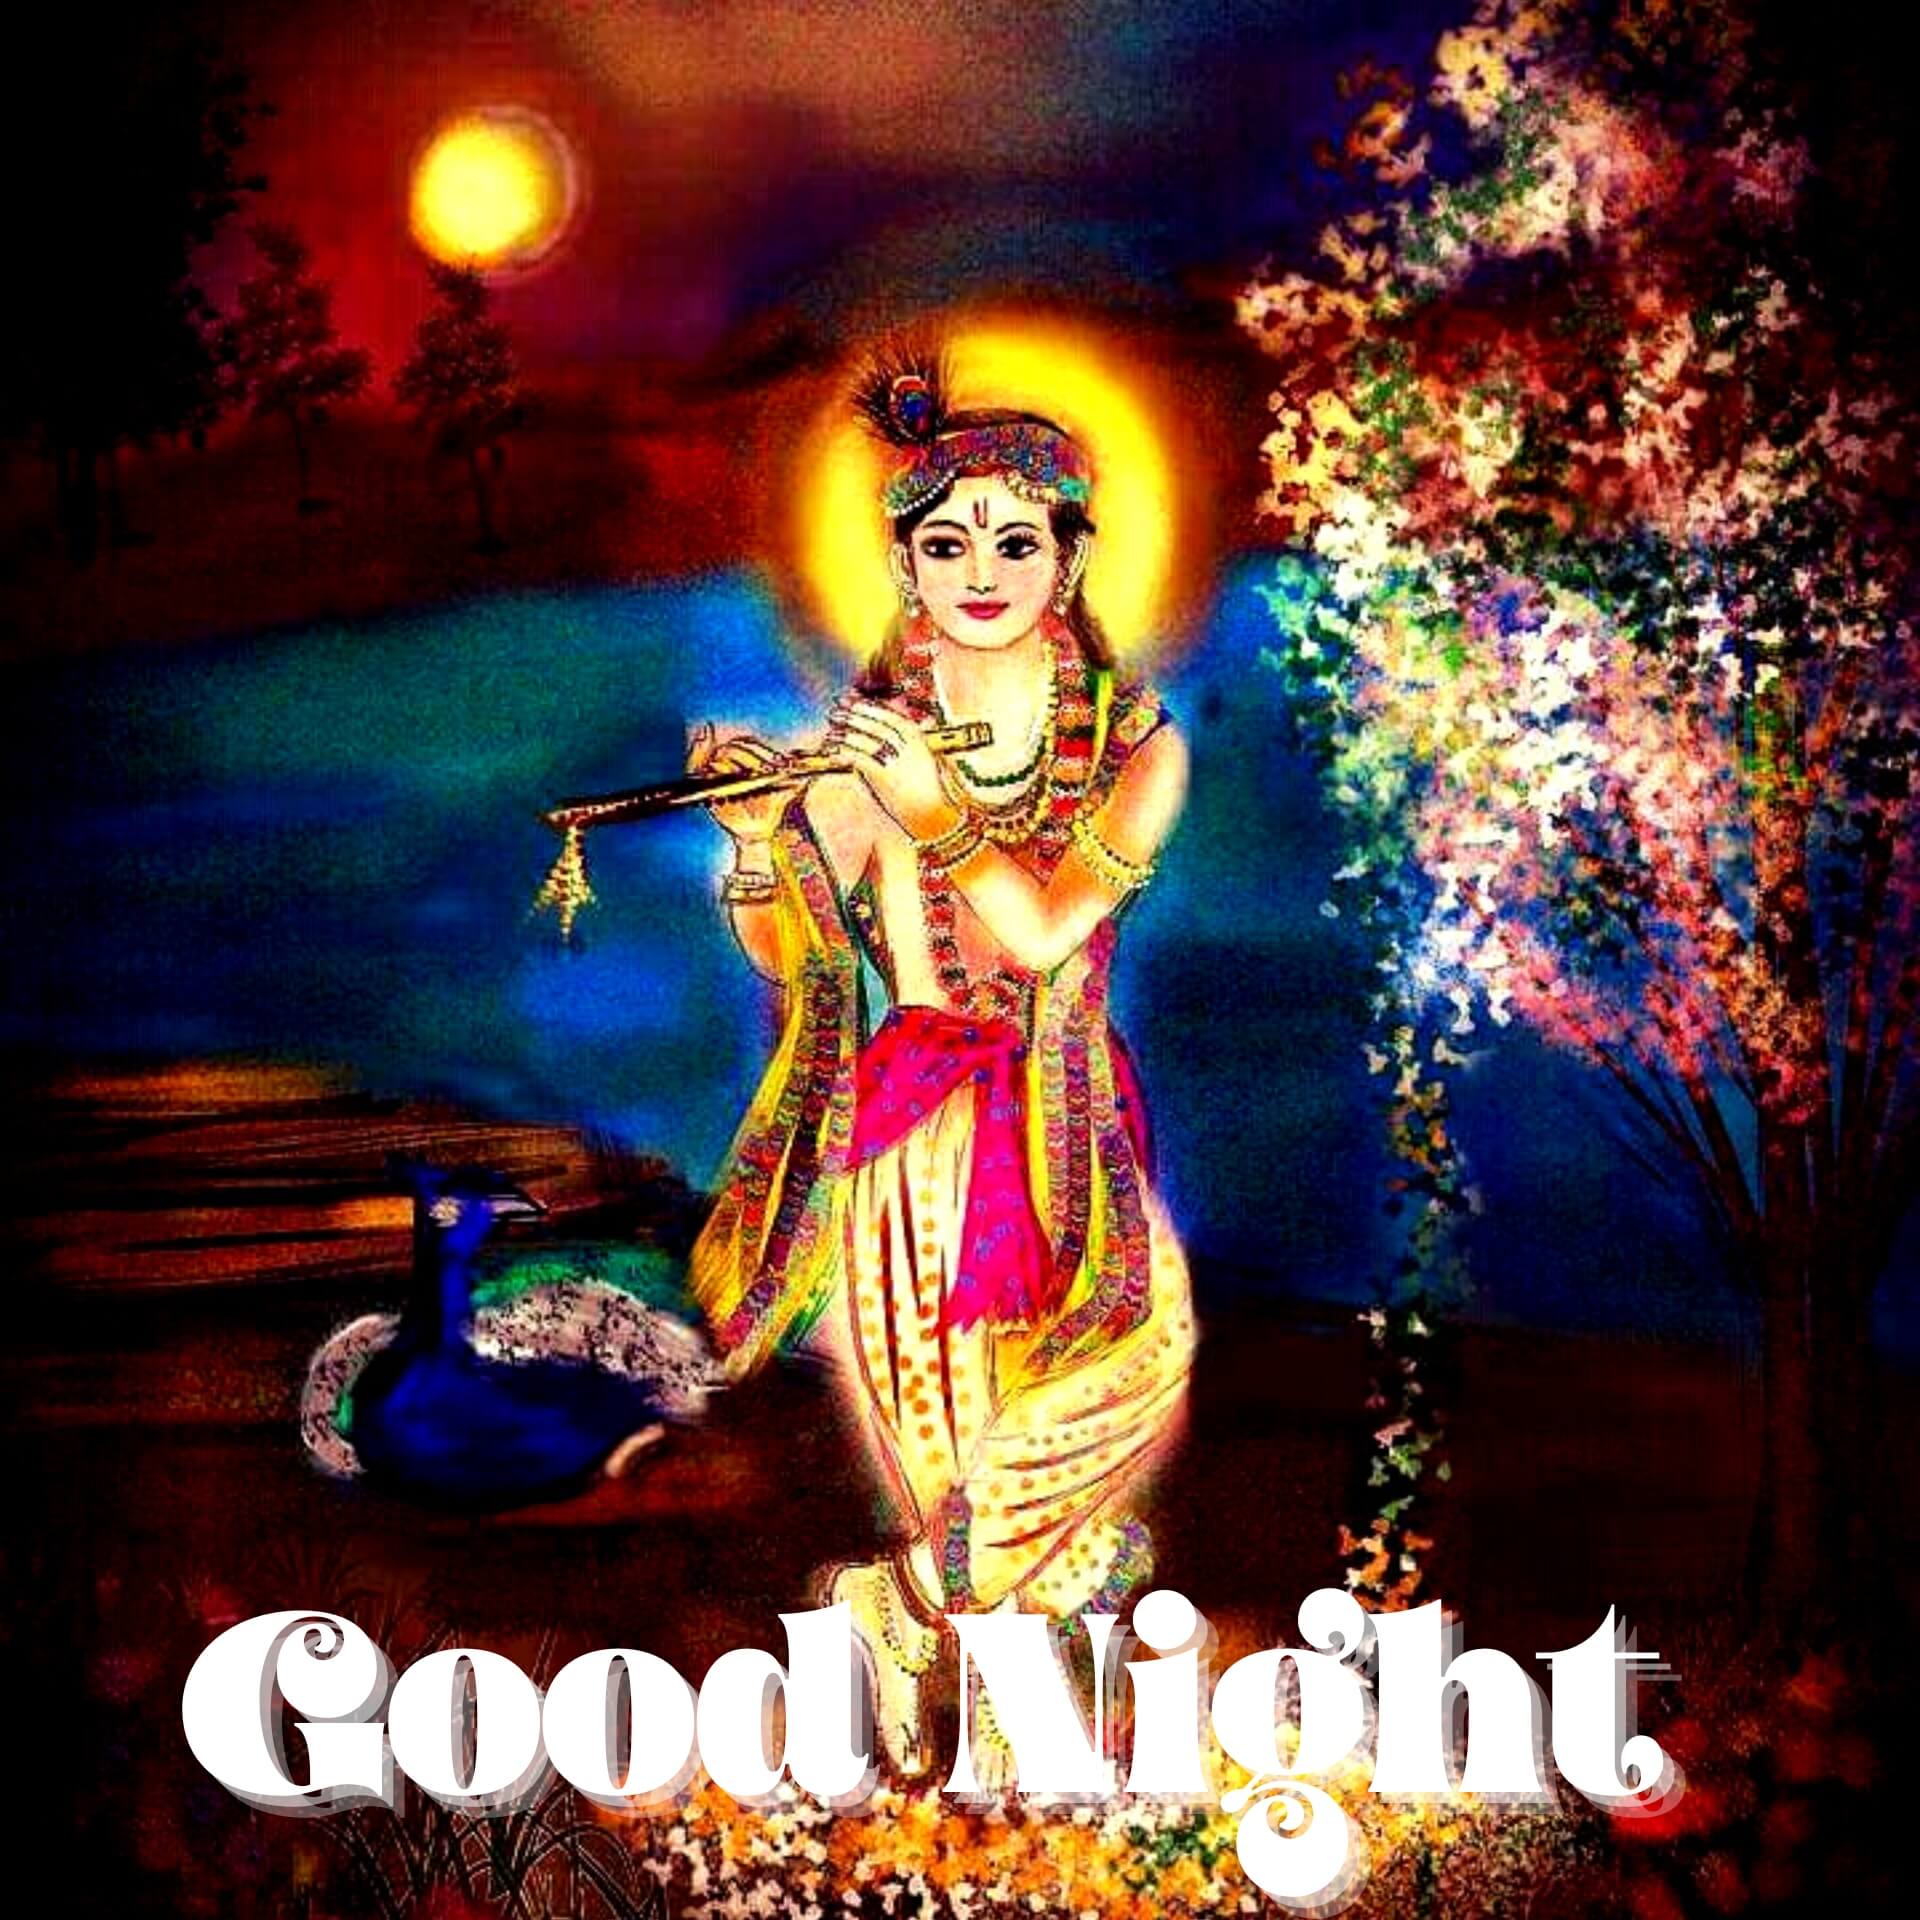 God Good Night Images Pics pictures Download